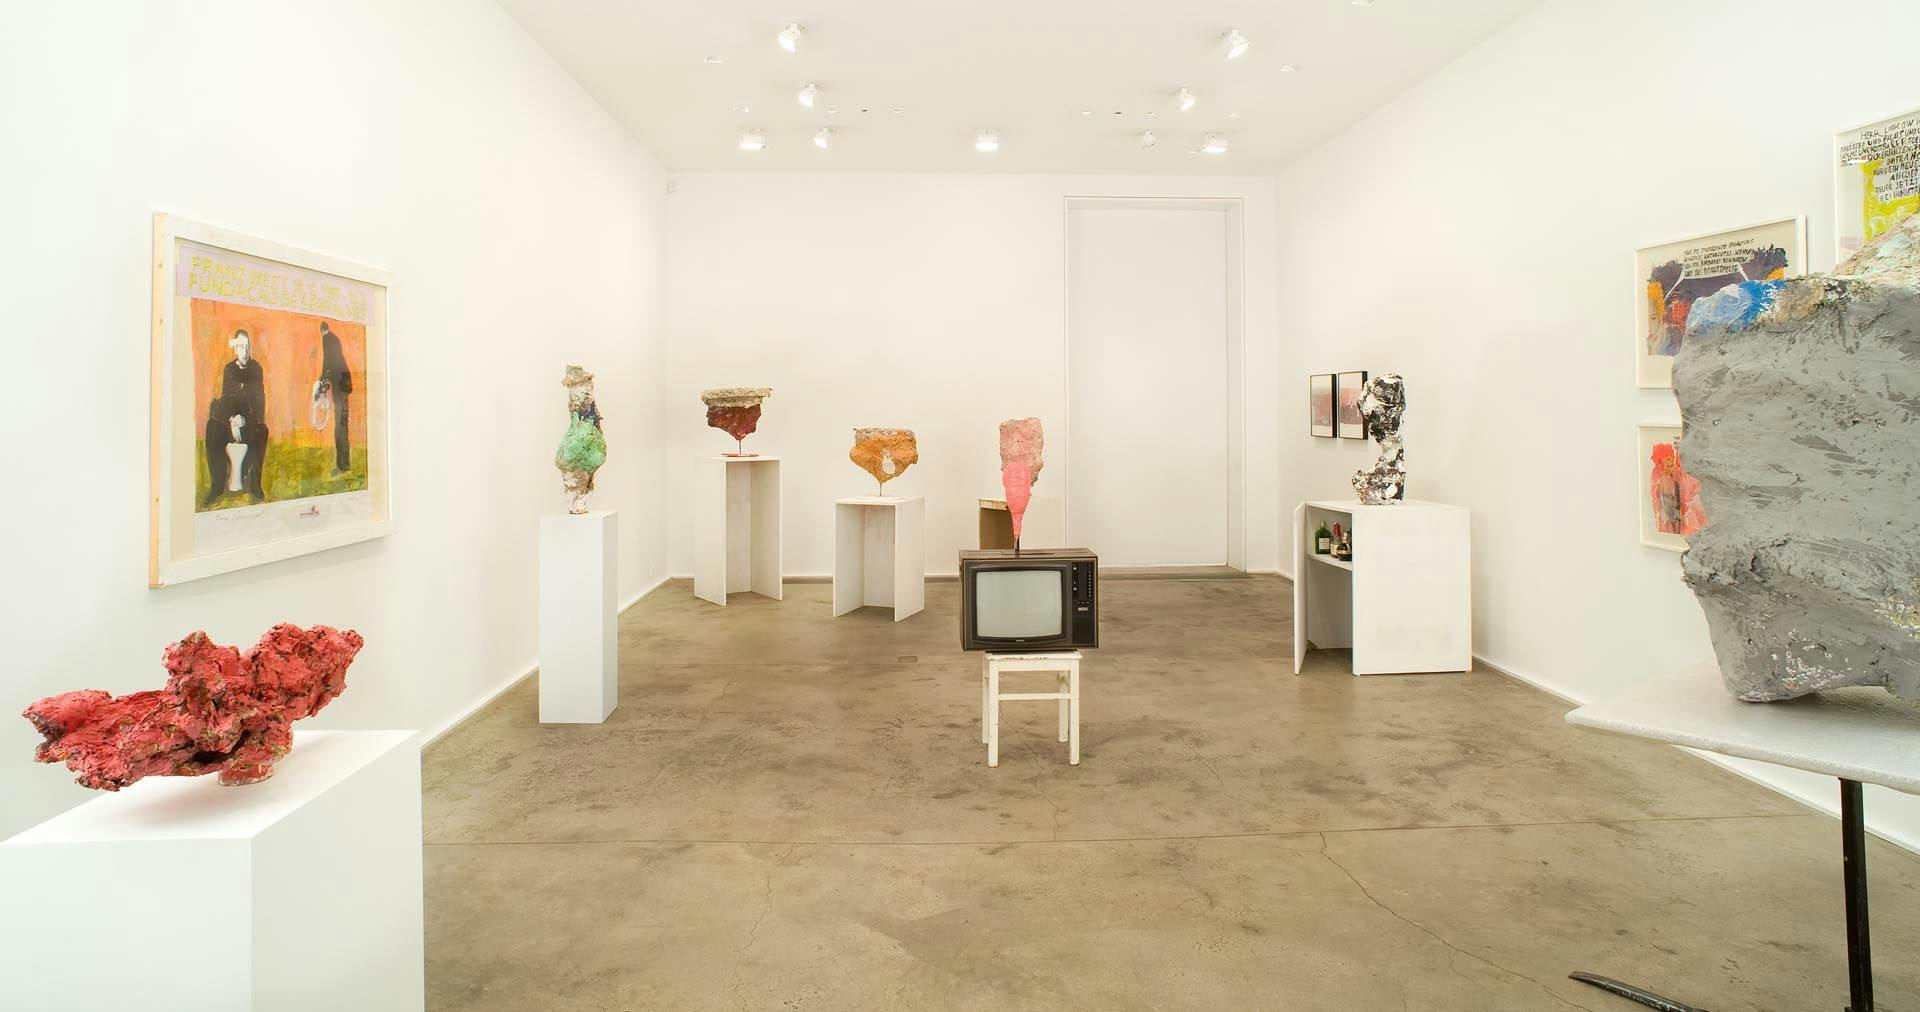 Installation view of the exhibition Franz West: Works from the 1990s, at David Zwirner in New York, dated 2009. 